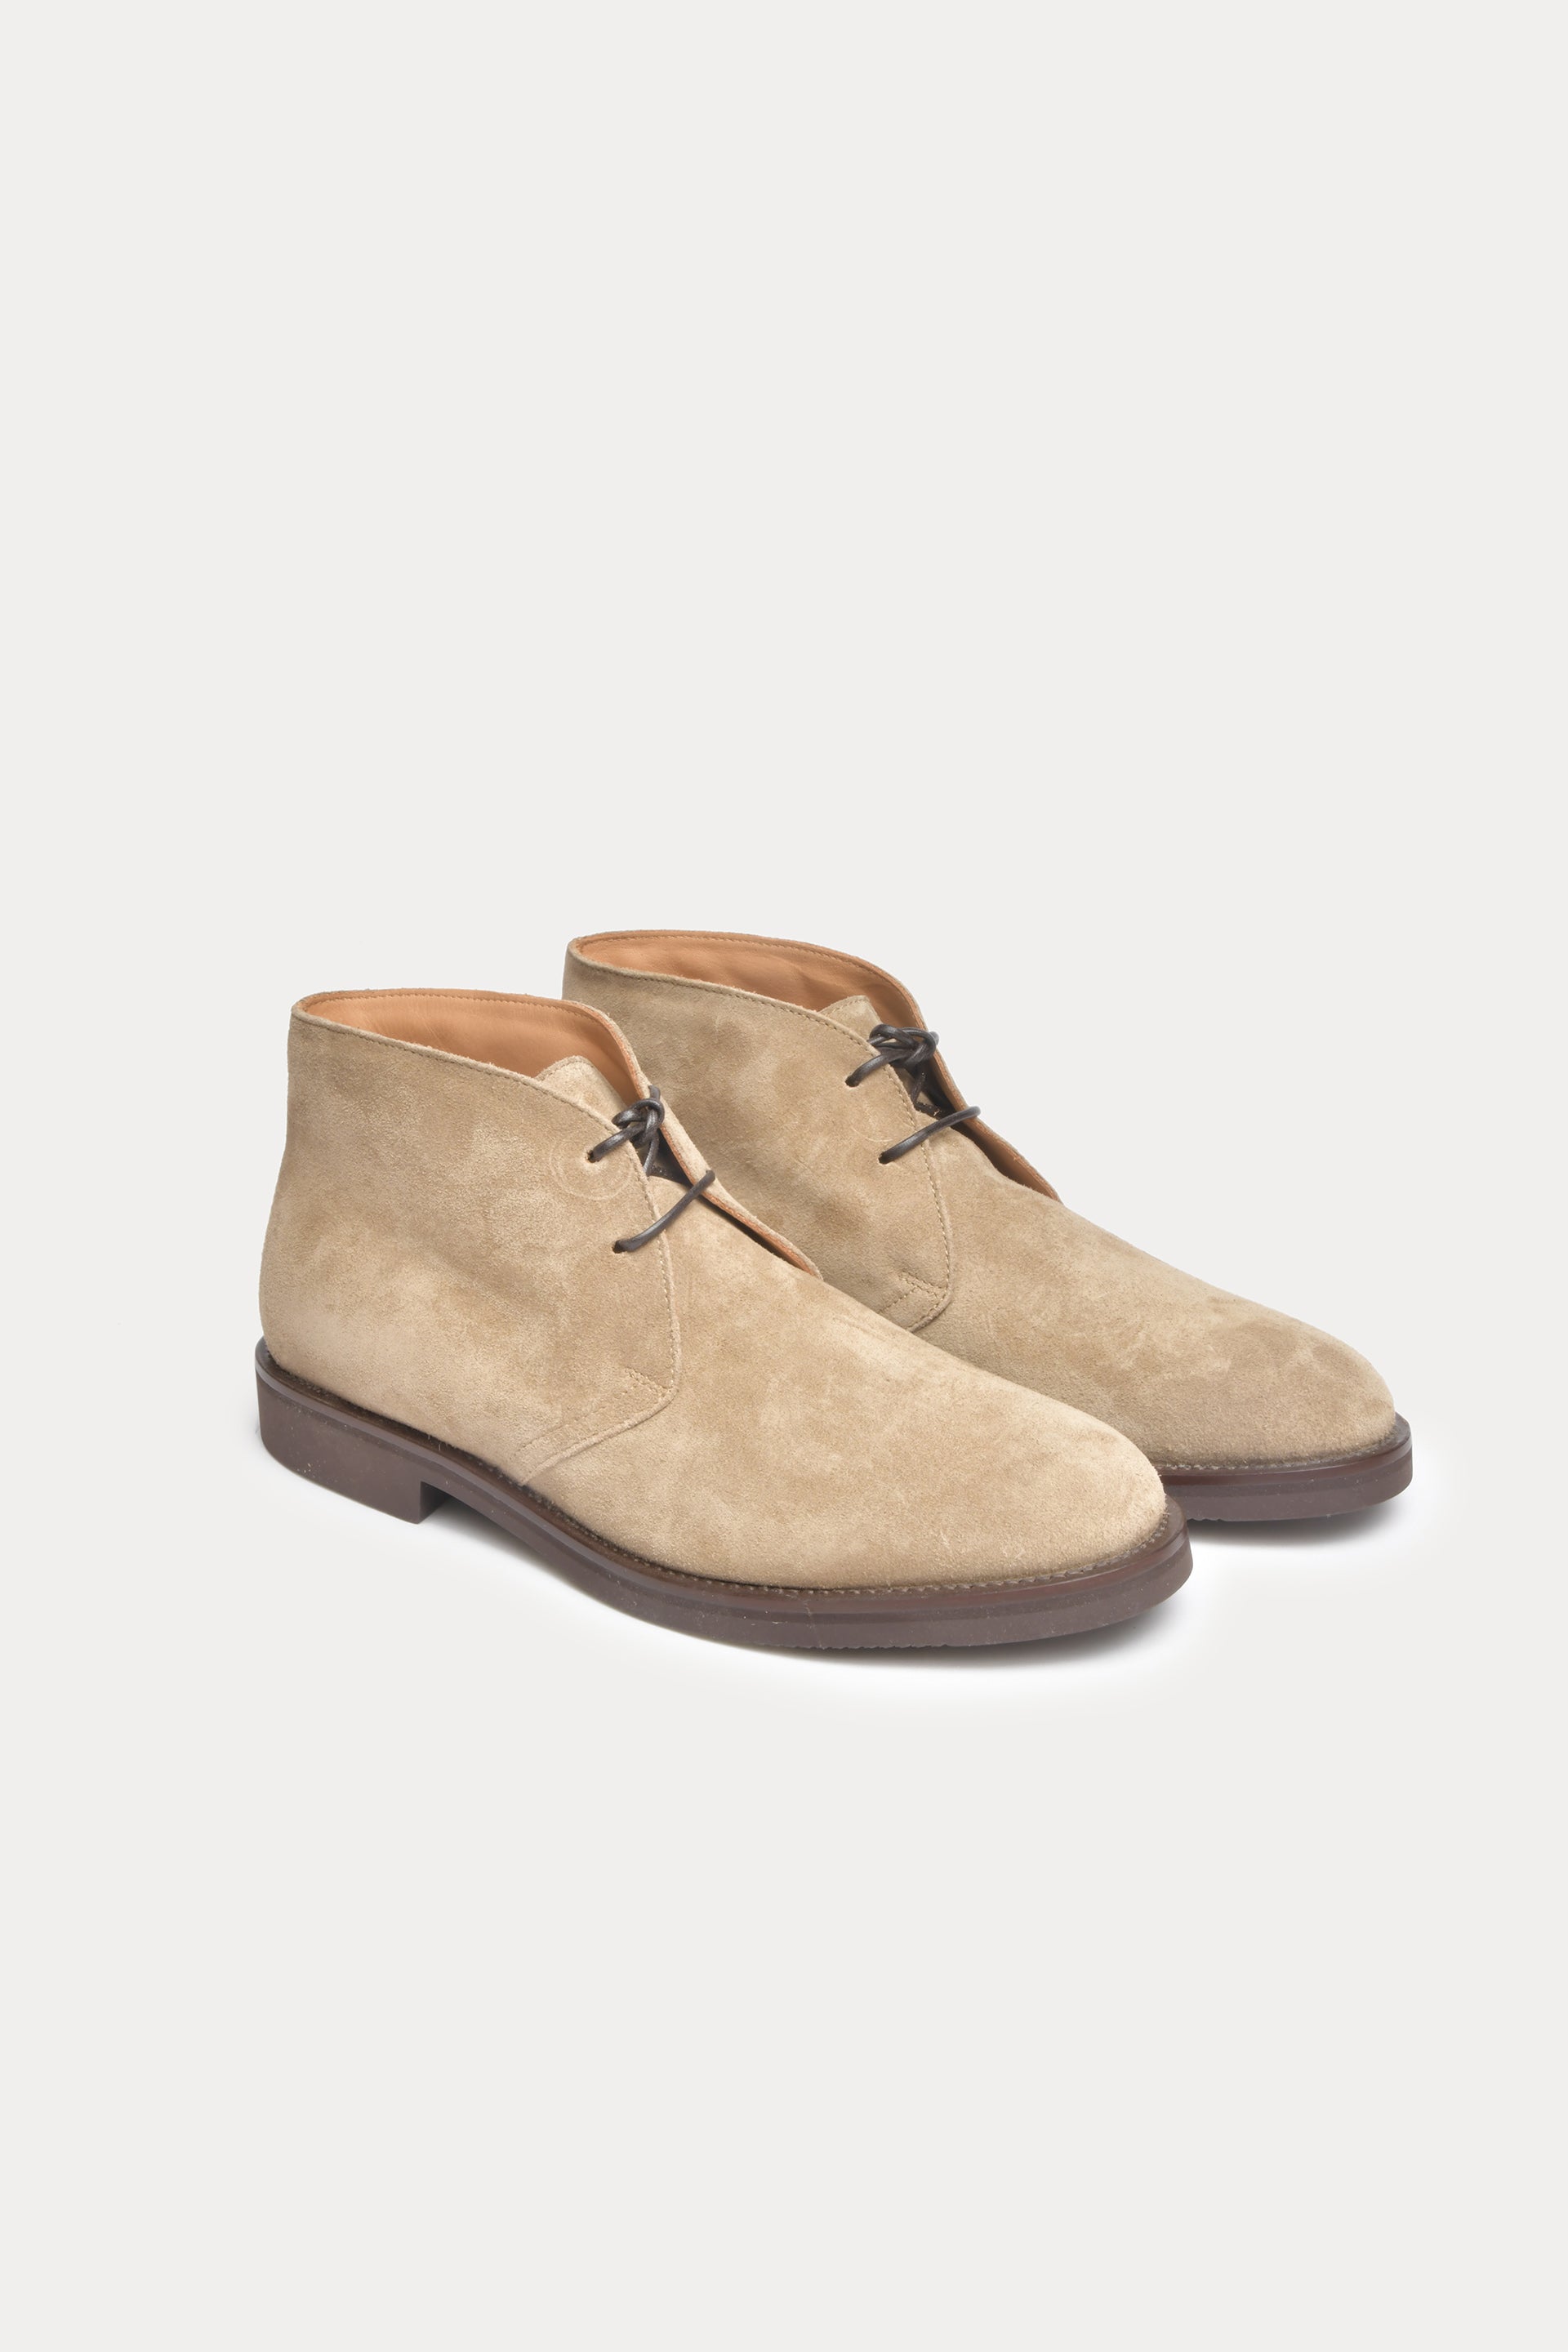 Beige Suede Leather Ankle Boots